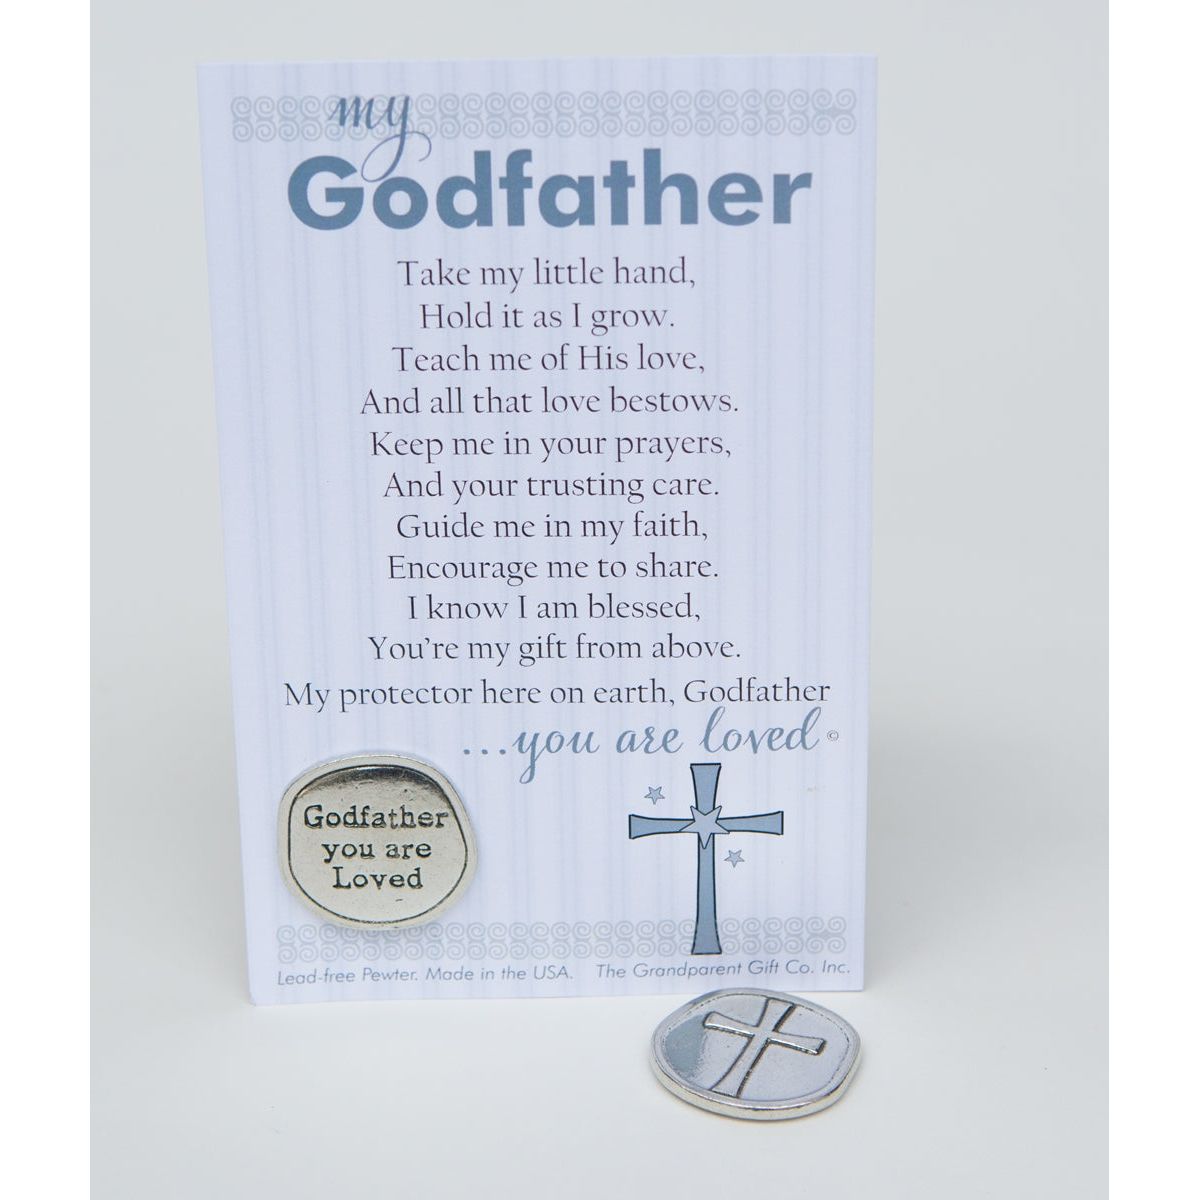 Godfather Gift: Handmade pewter coin with &quot;Godfather you are Loved&quot; on one side and a cross on the other, packaged in a clear bag with &quot;My Godfather&quot; poem.